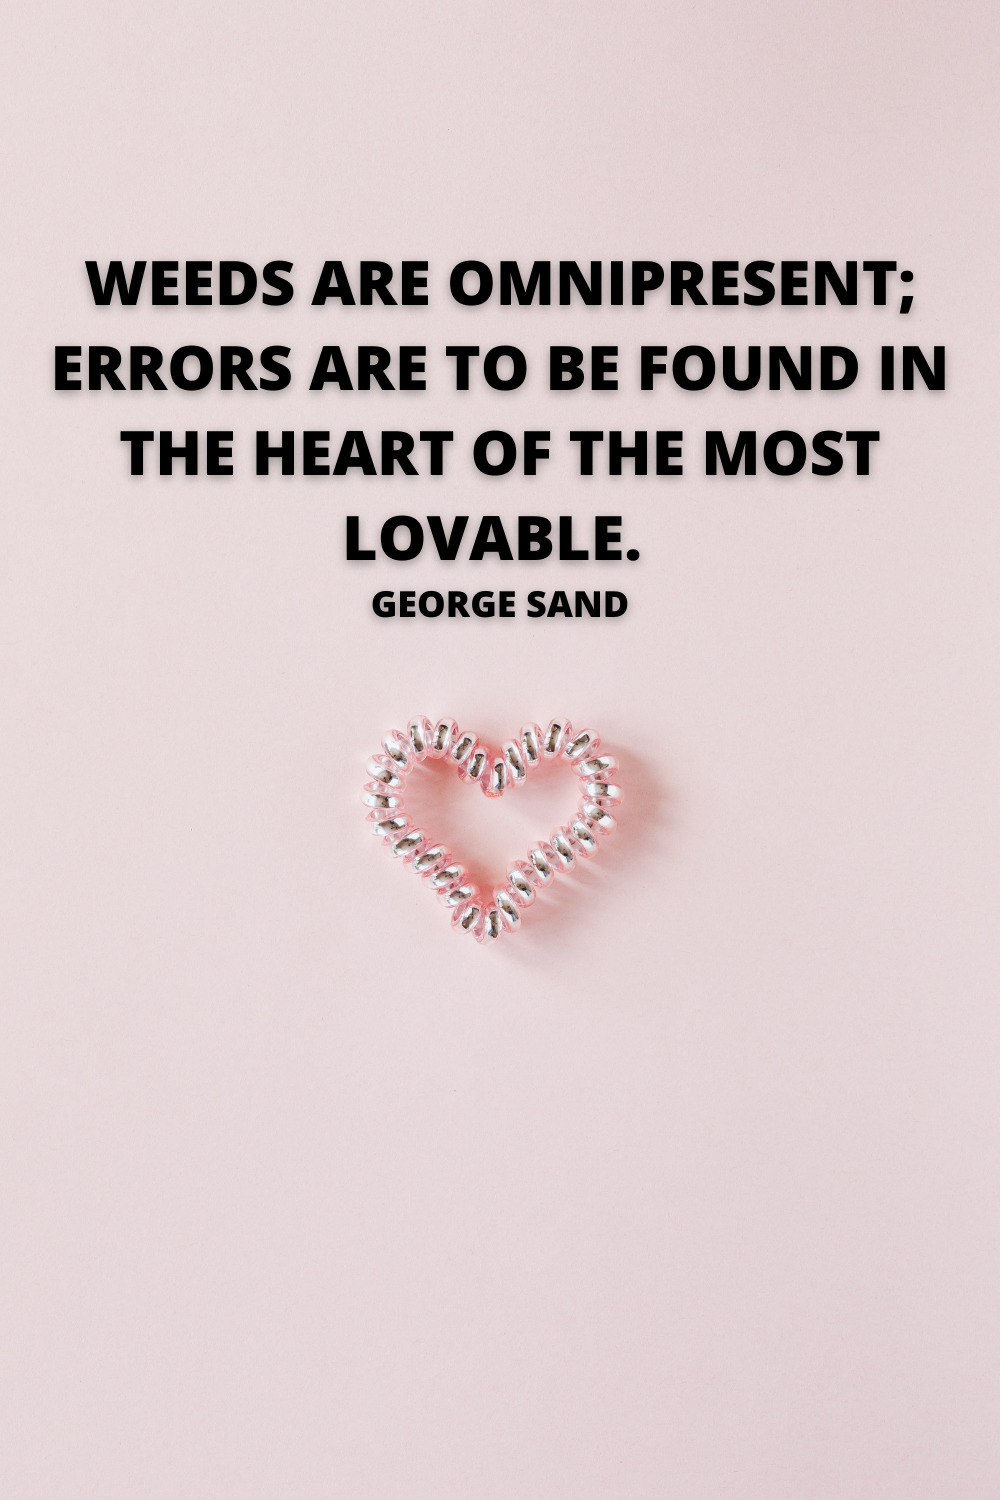 errors are to be found in the heart of the most lovable